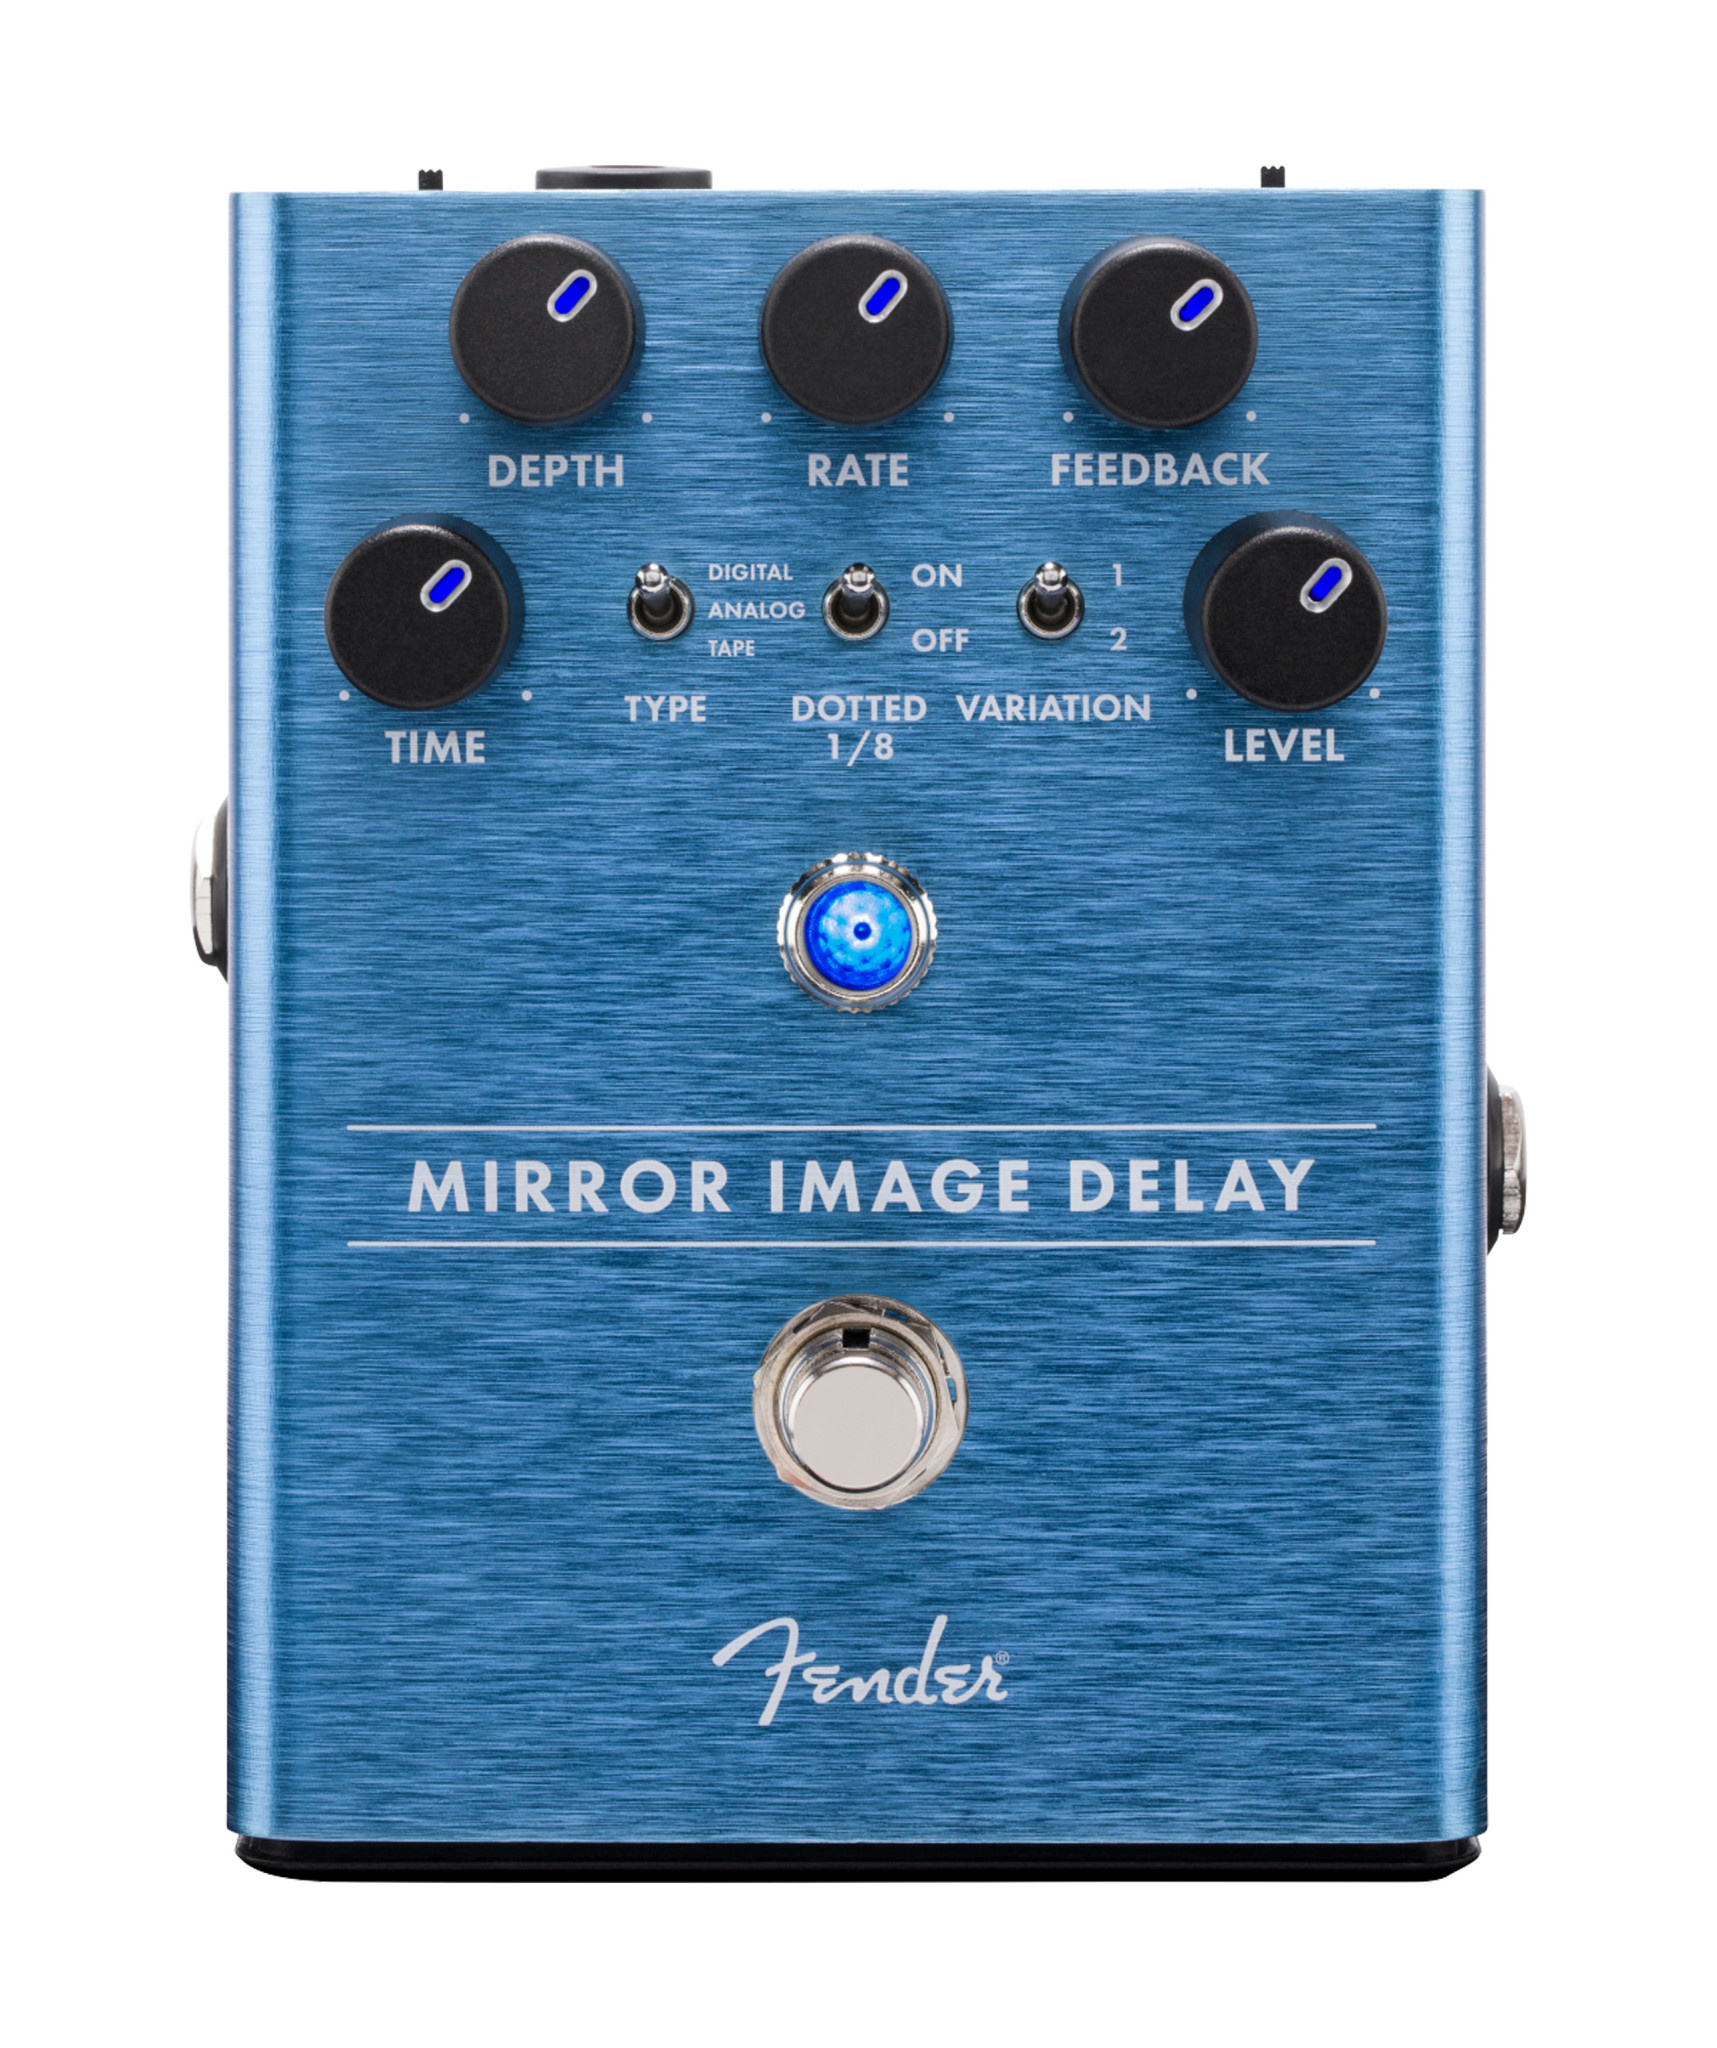 Fender　Image　Mirror　Delay　Newell's　Music